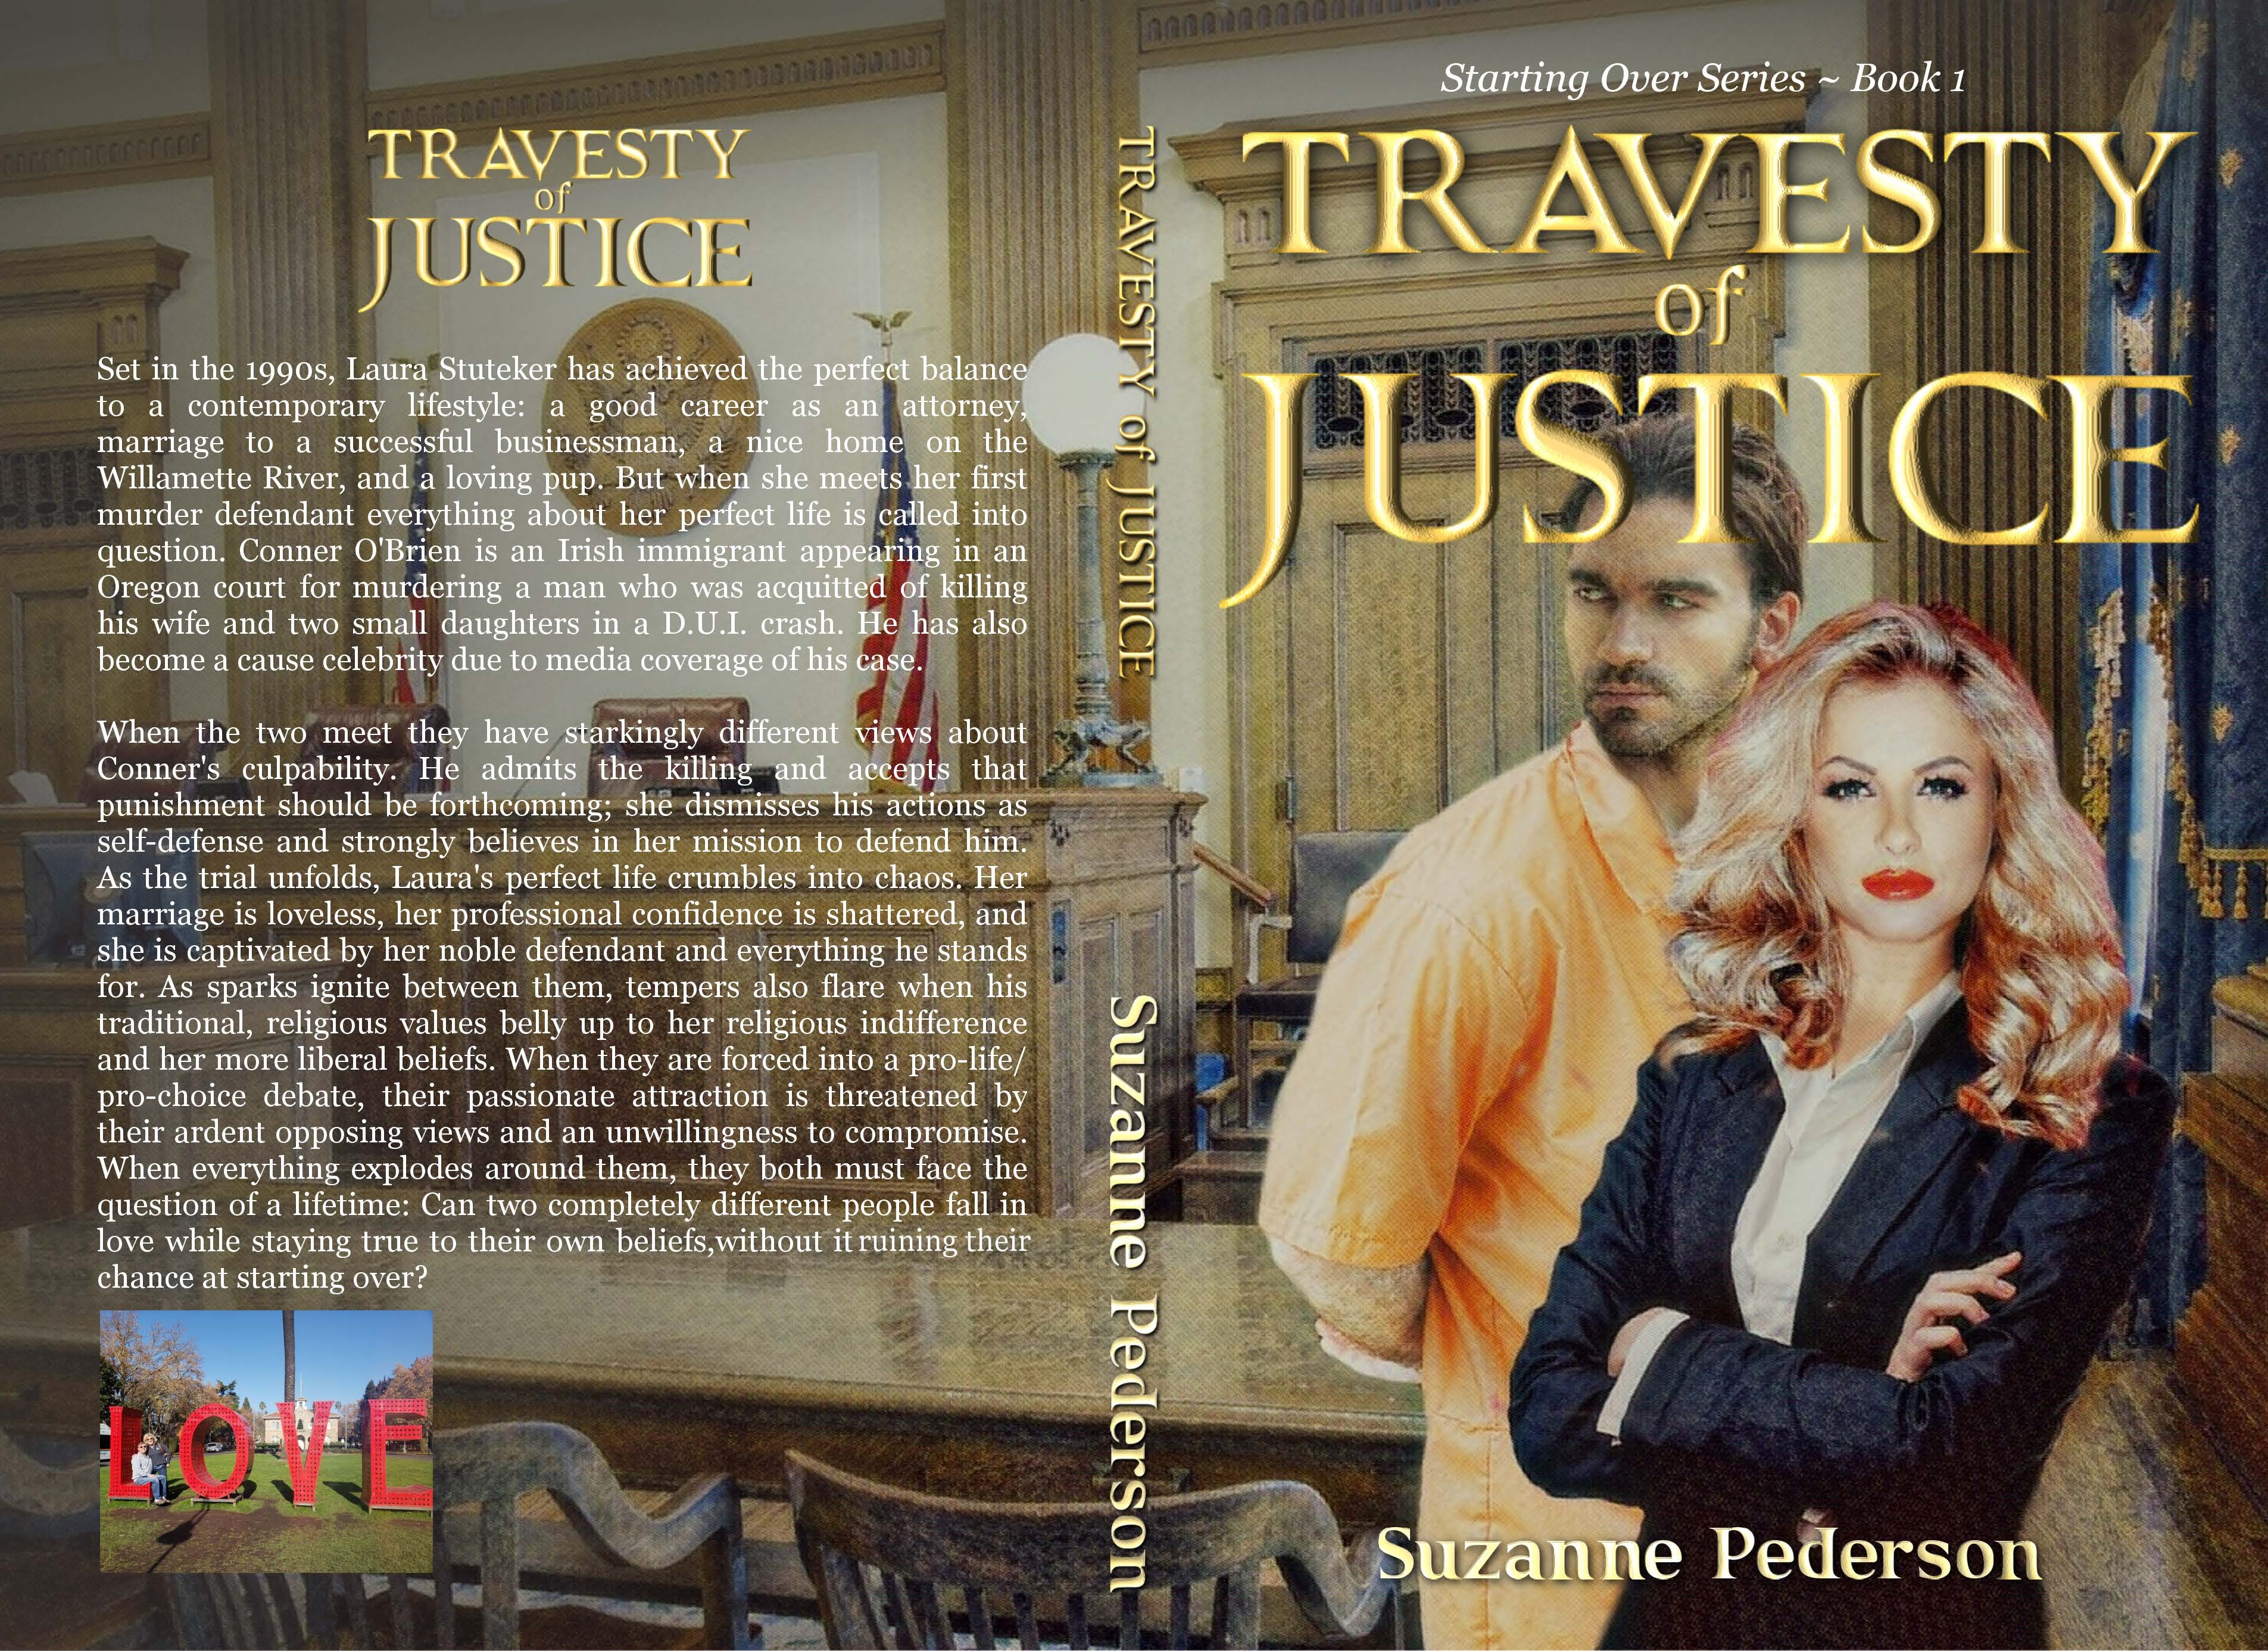 Travesty of Justice - Book 1 in the Starting Over series.